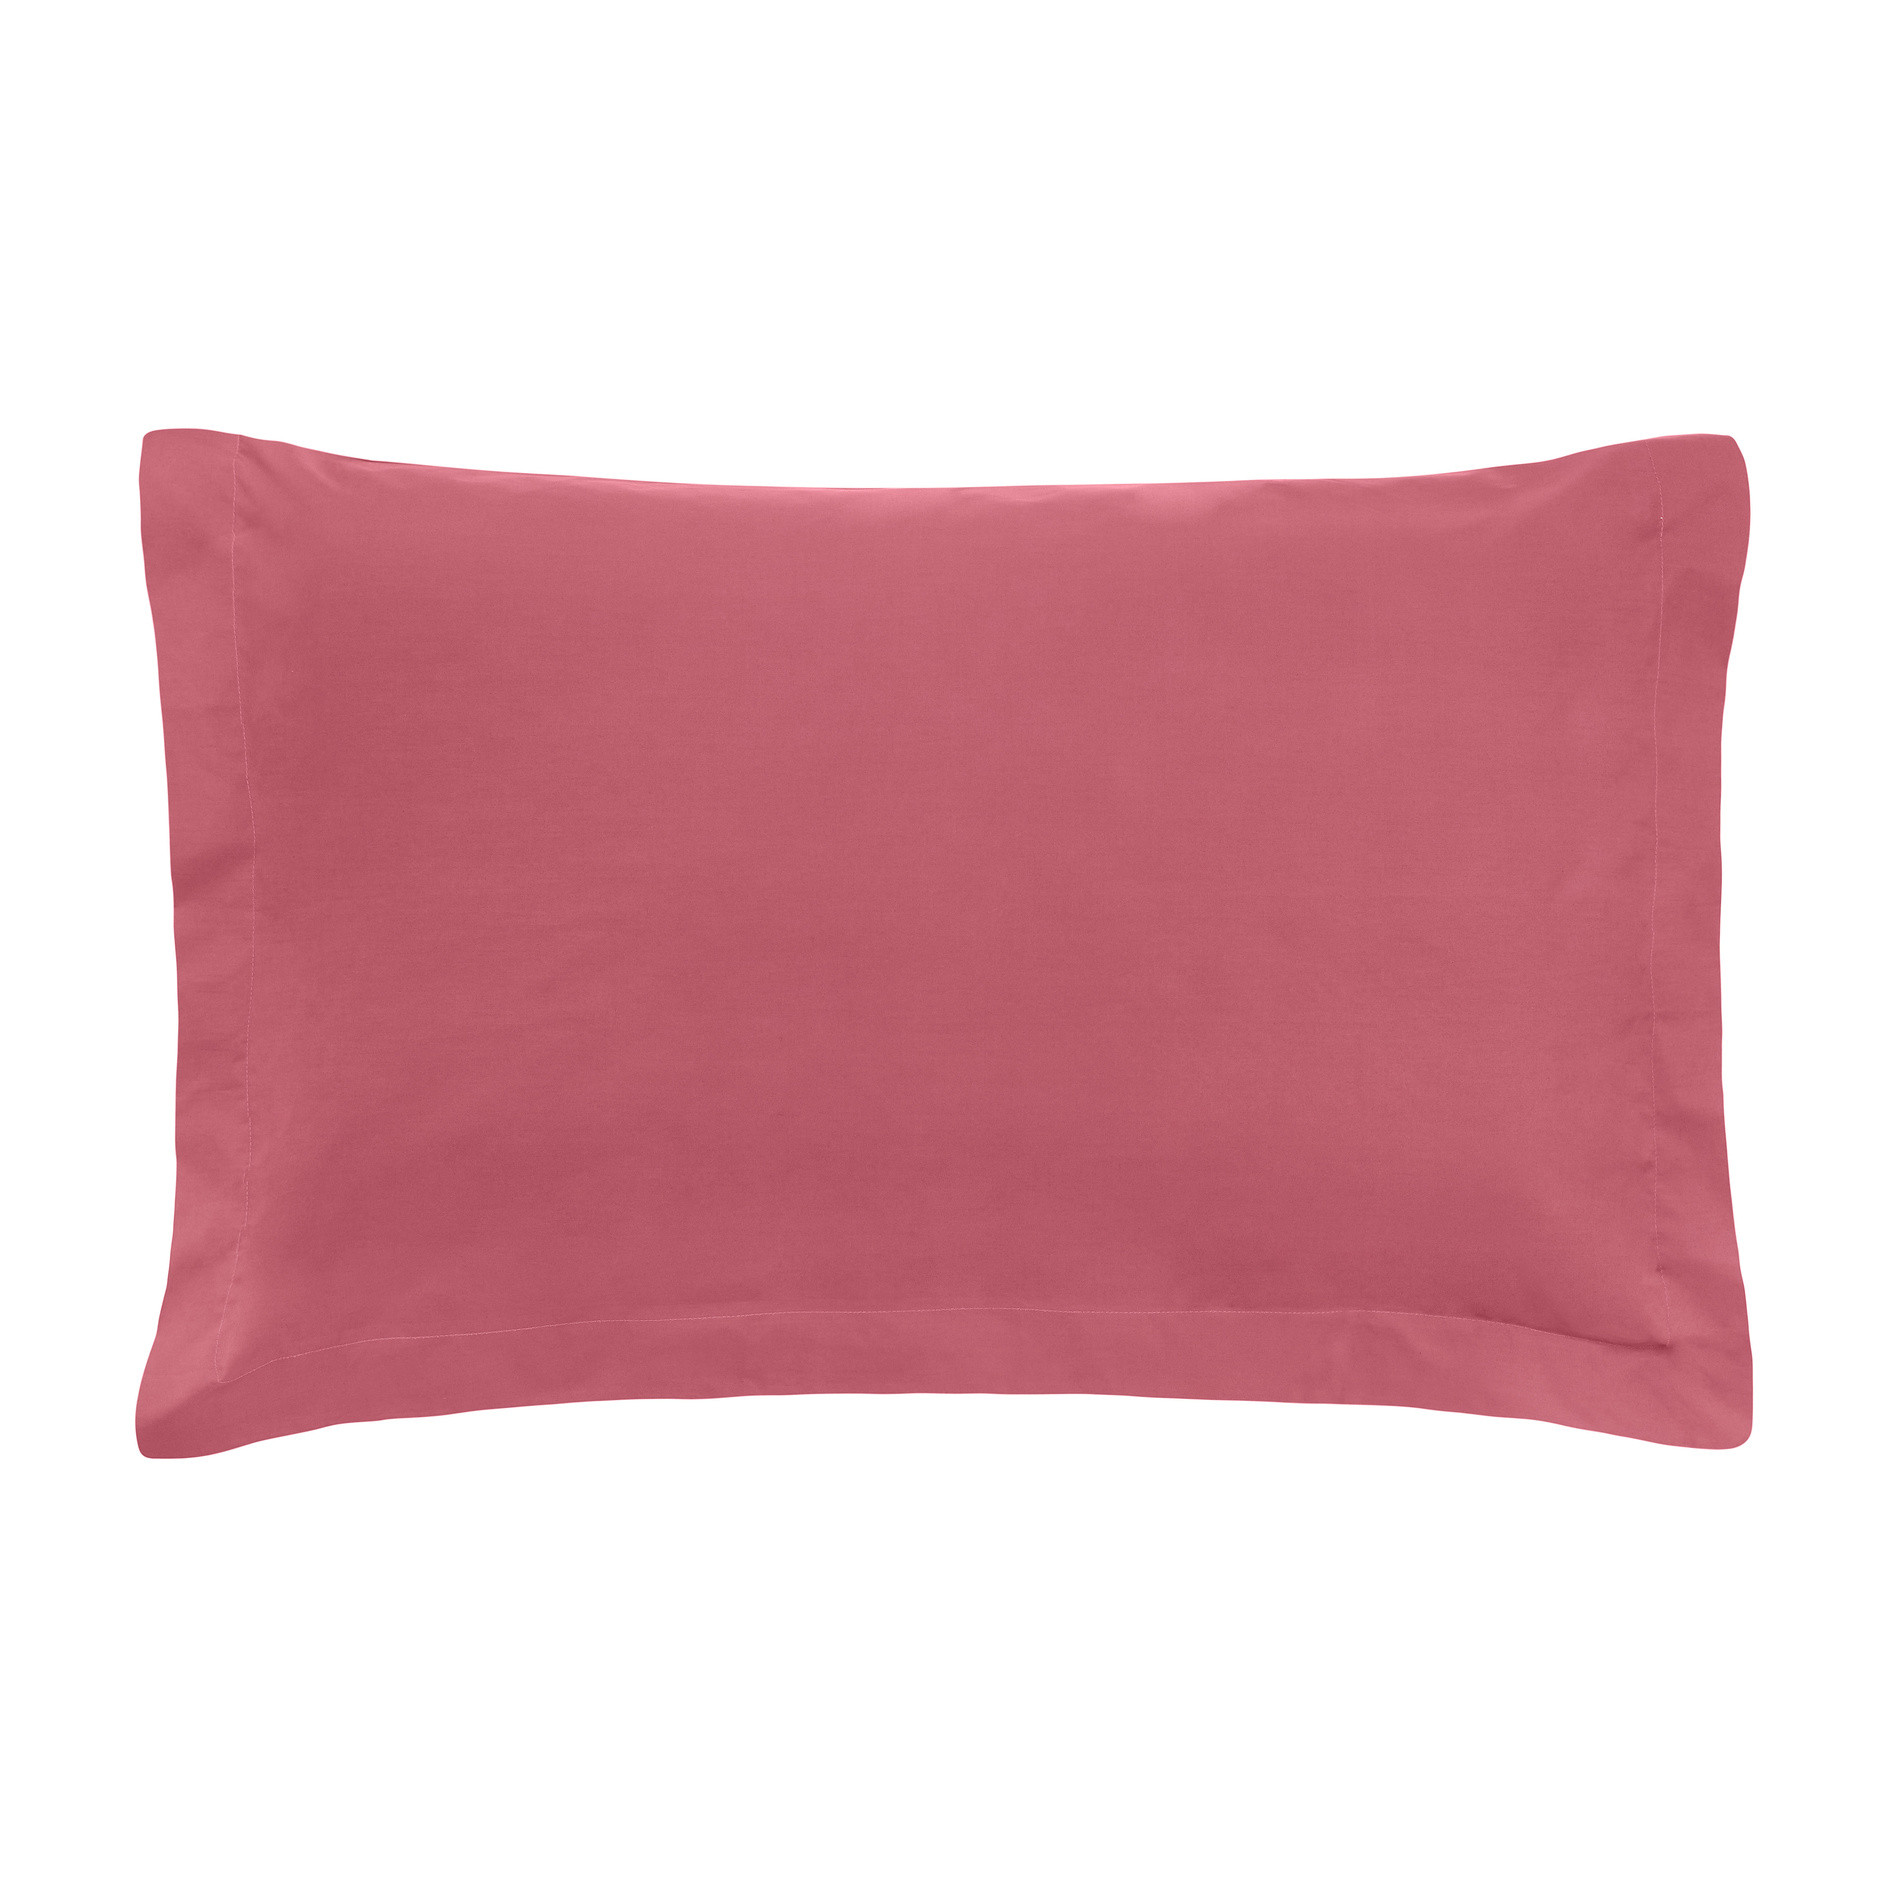 Zefiro solid colour pillowcase in percale., Dark Pink, large image number 0